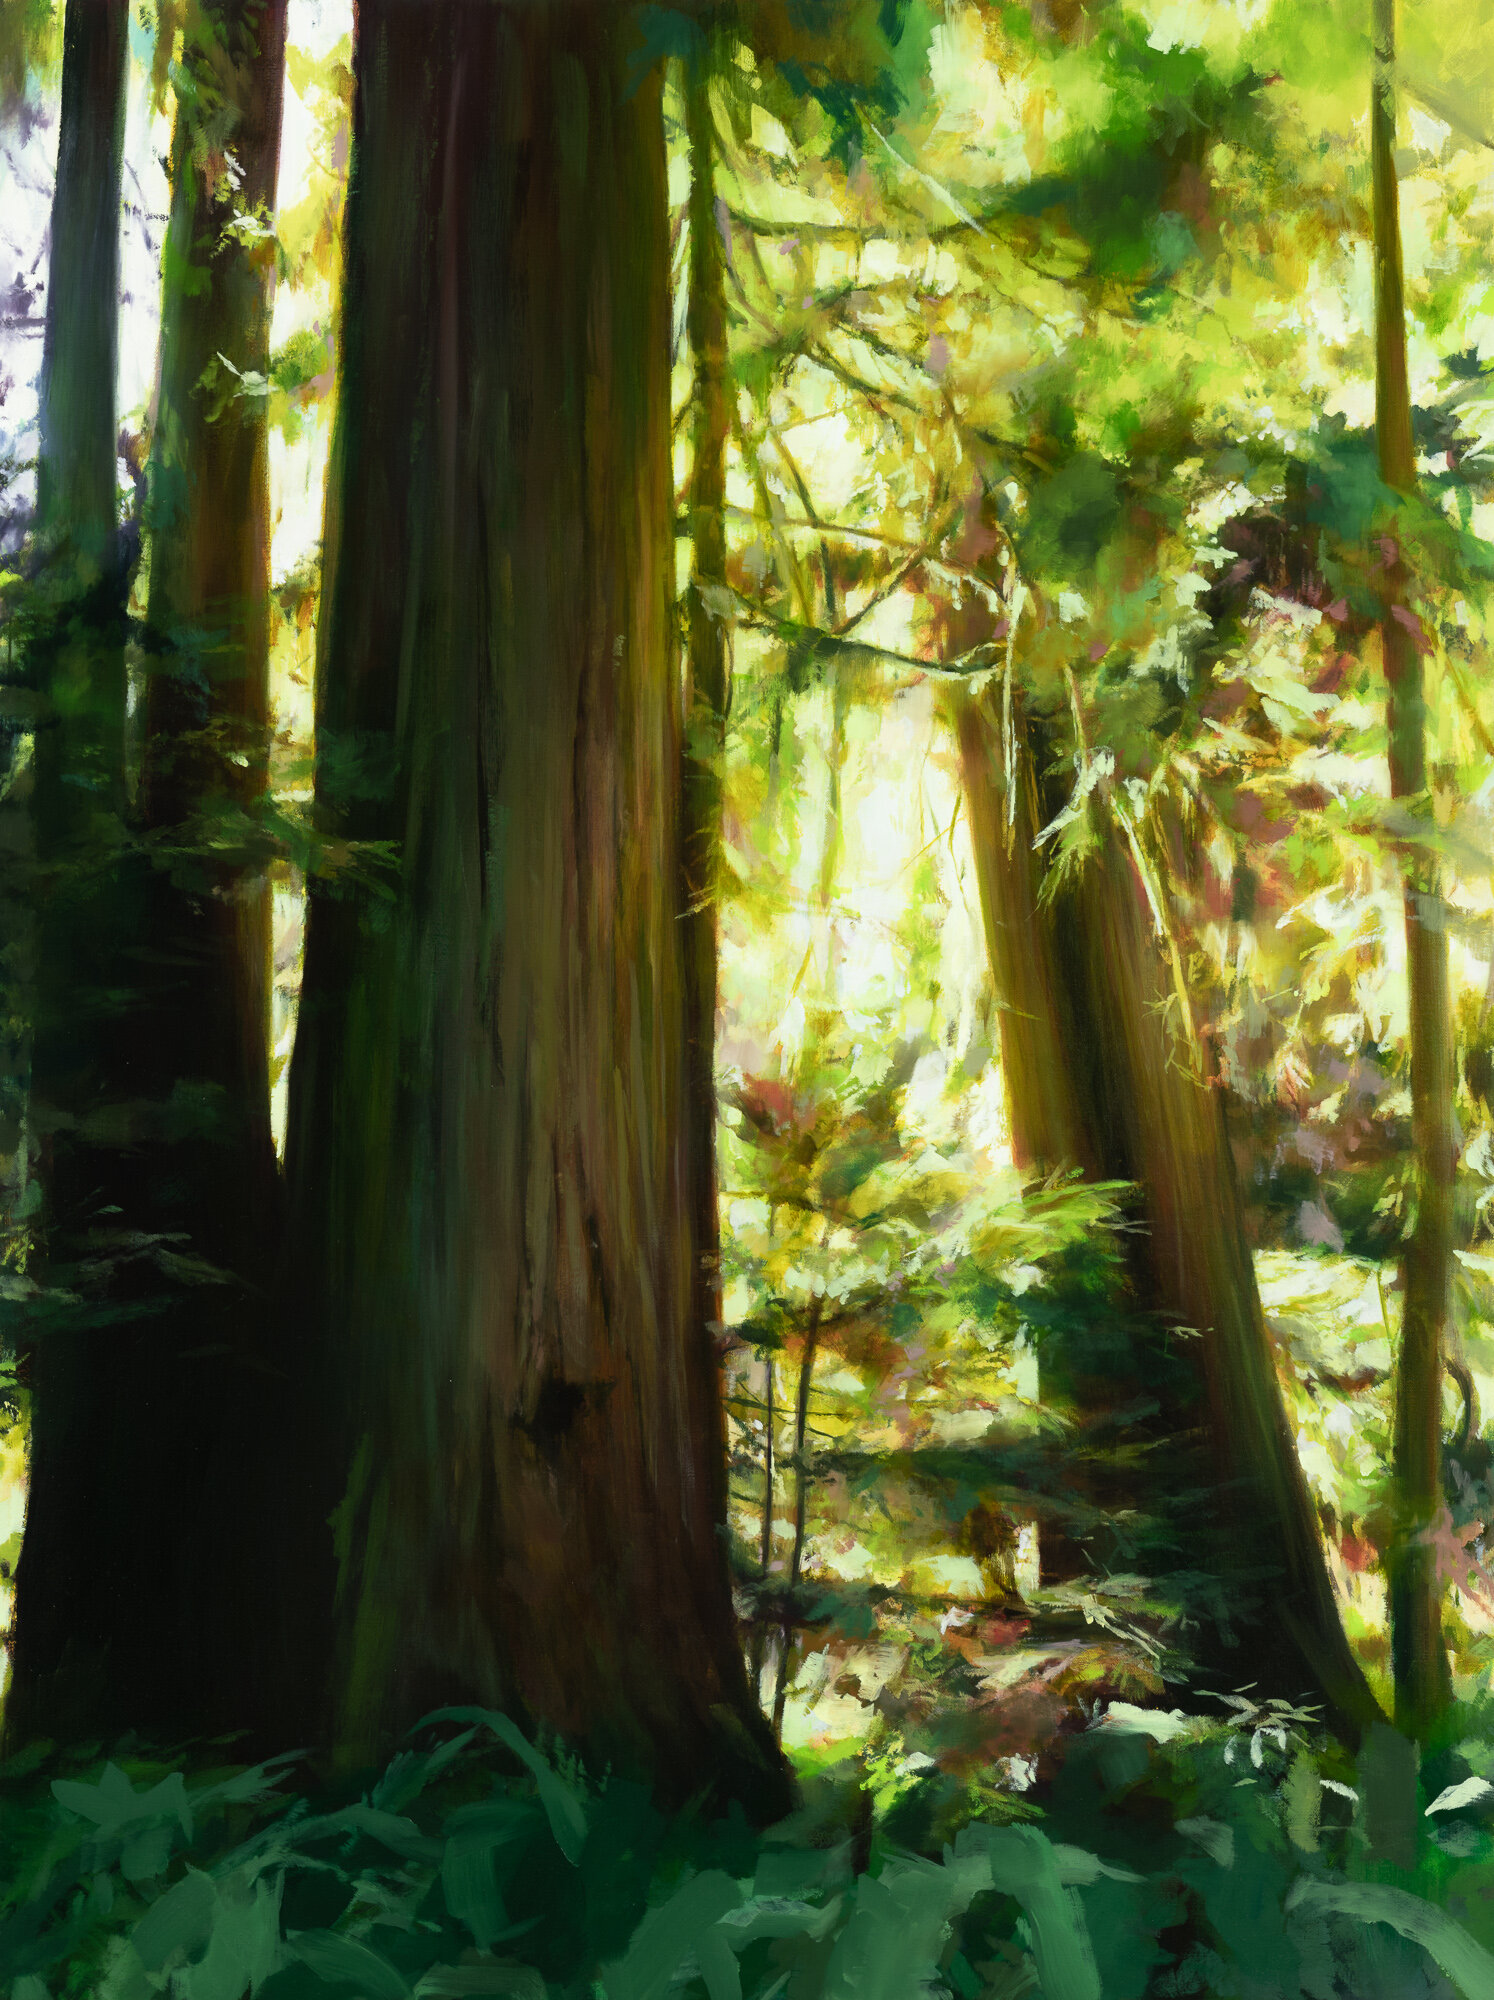   redwoods •   40" x 30"  oil on canvas  2020   